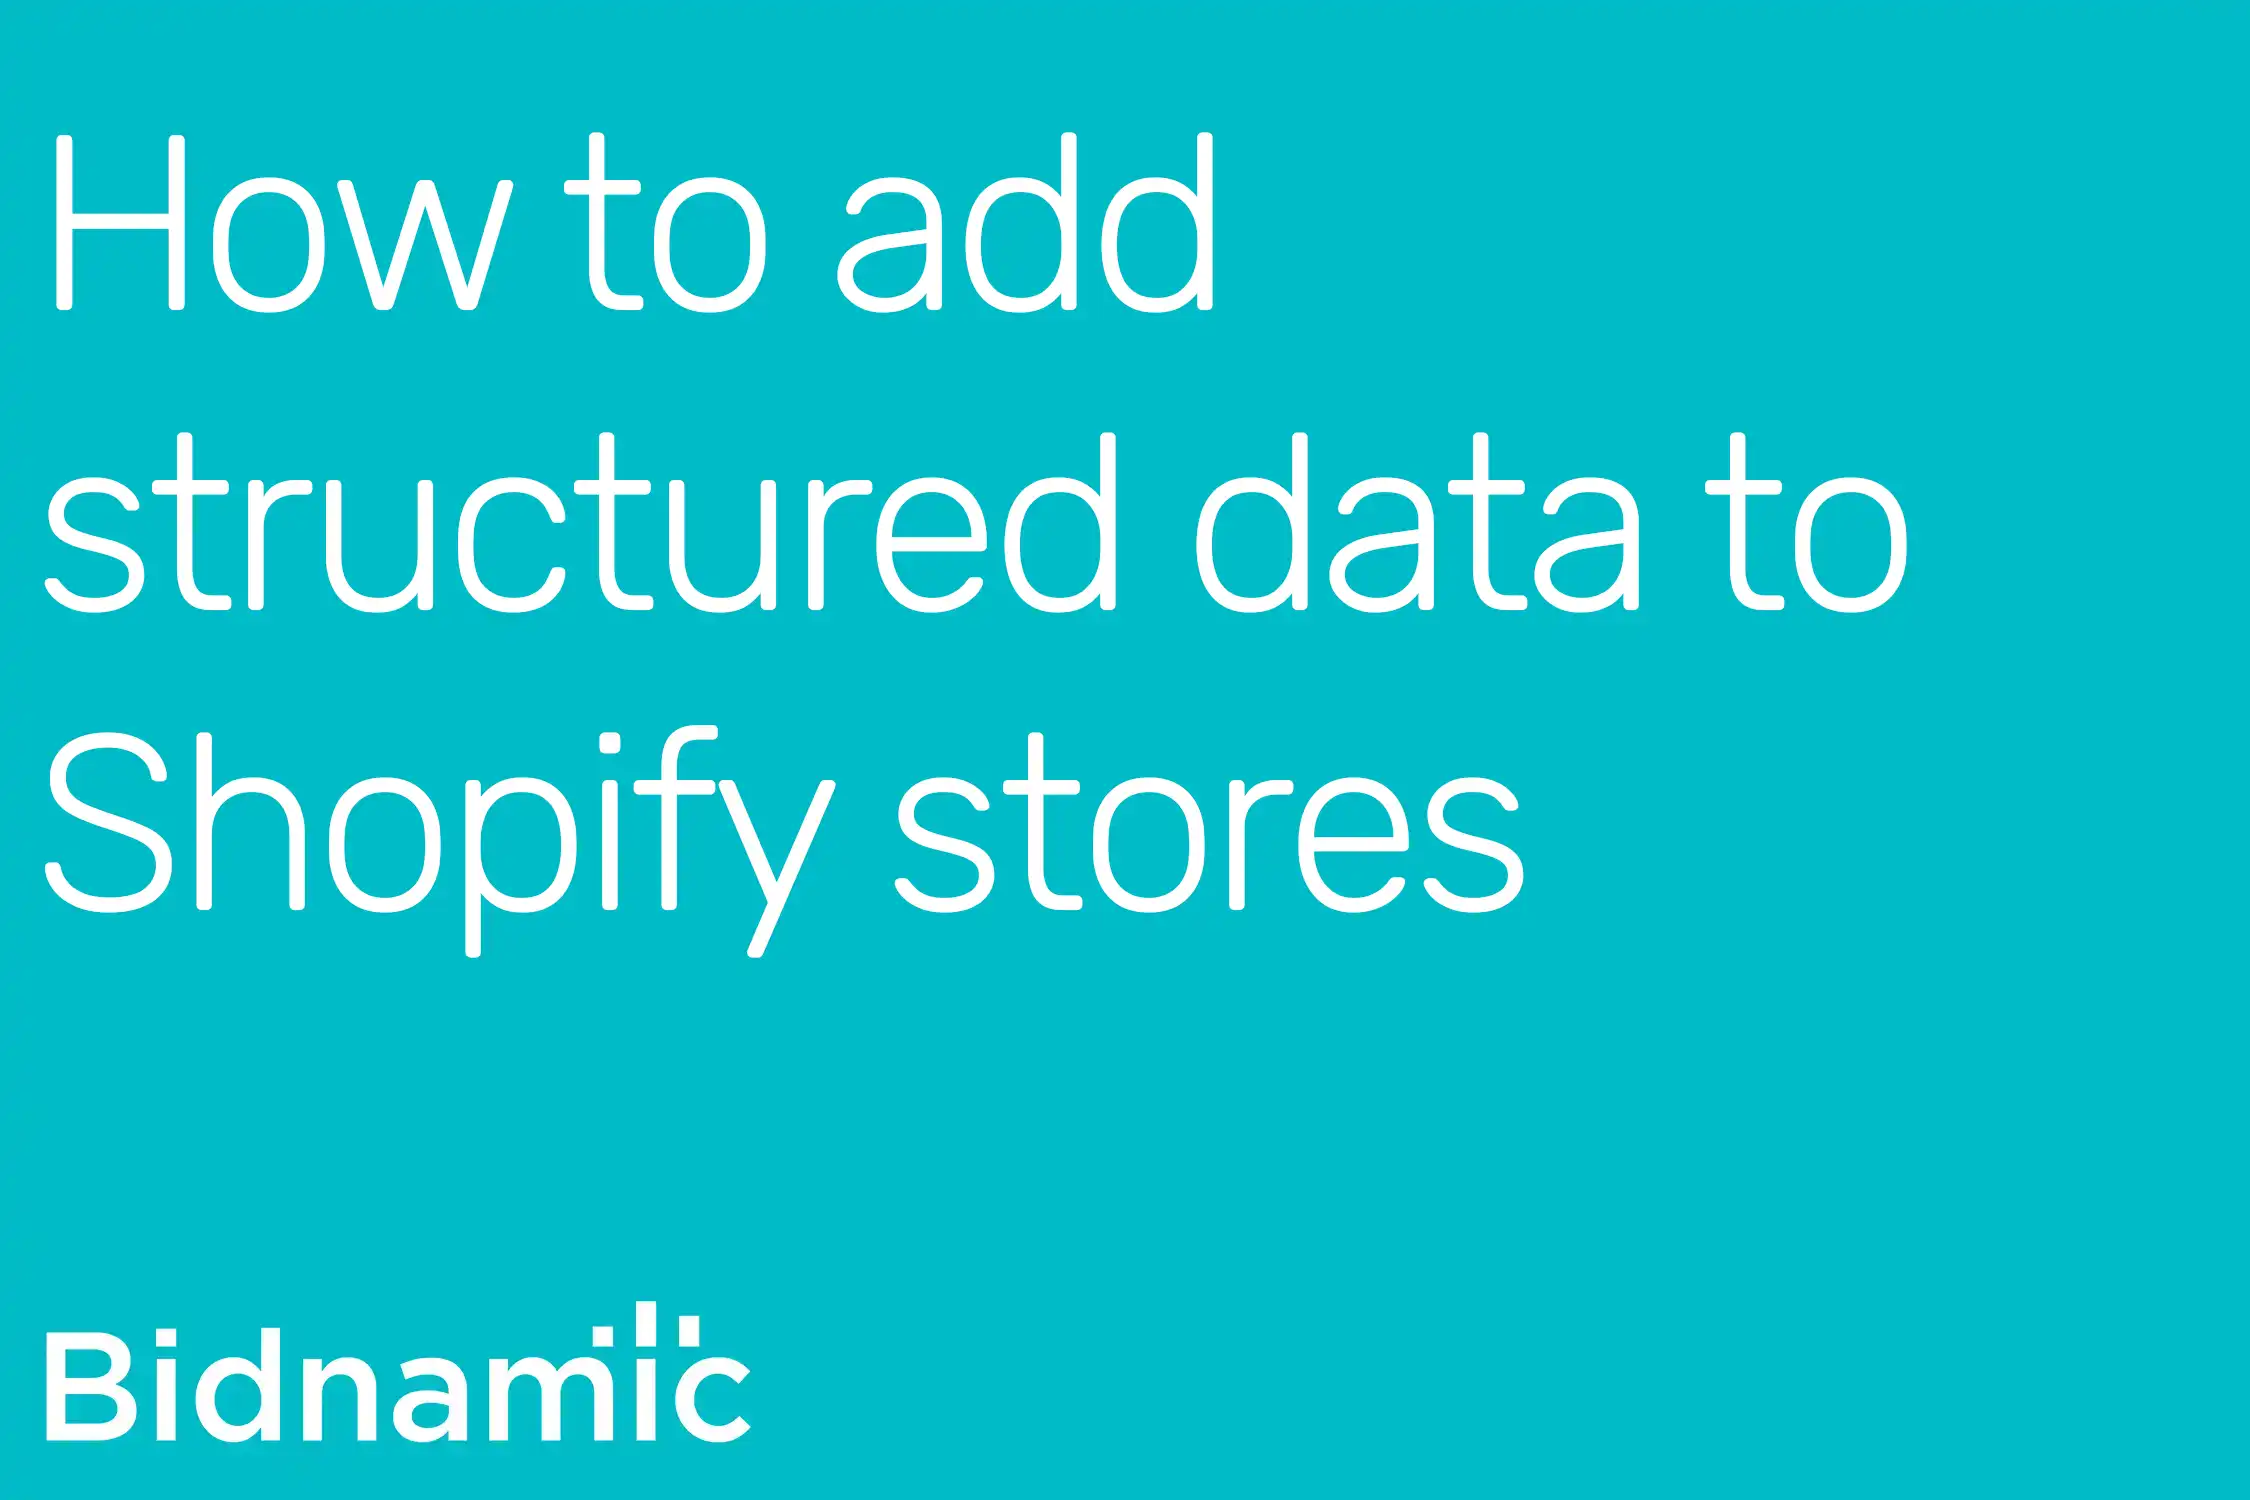 How to add structured data to Shopify stores